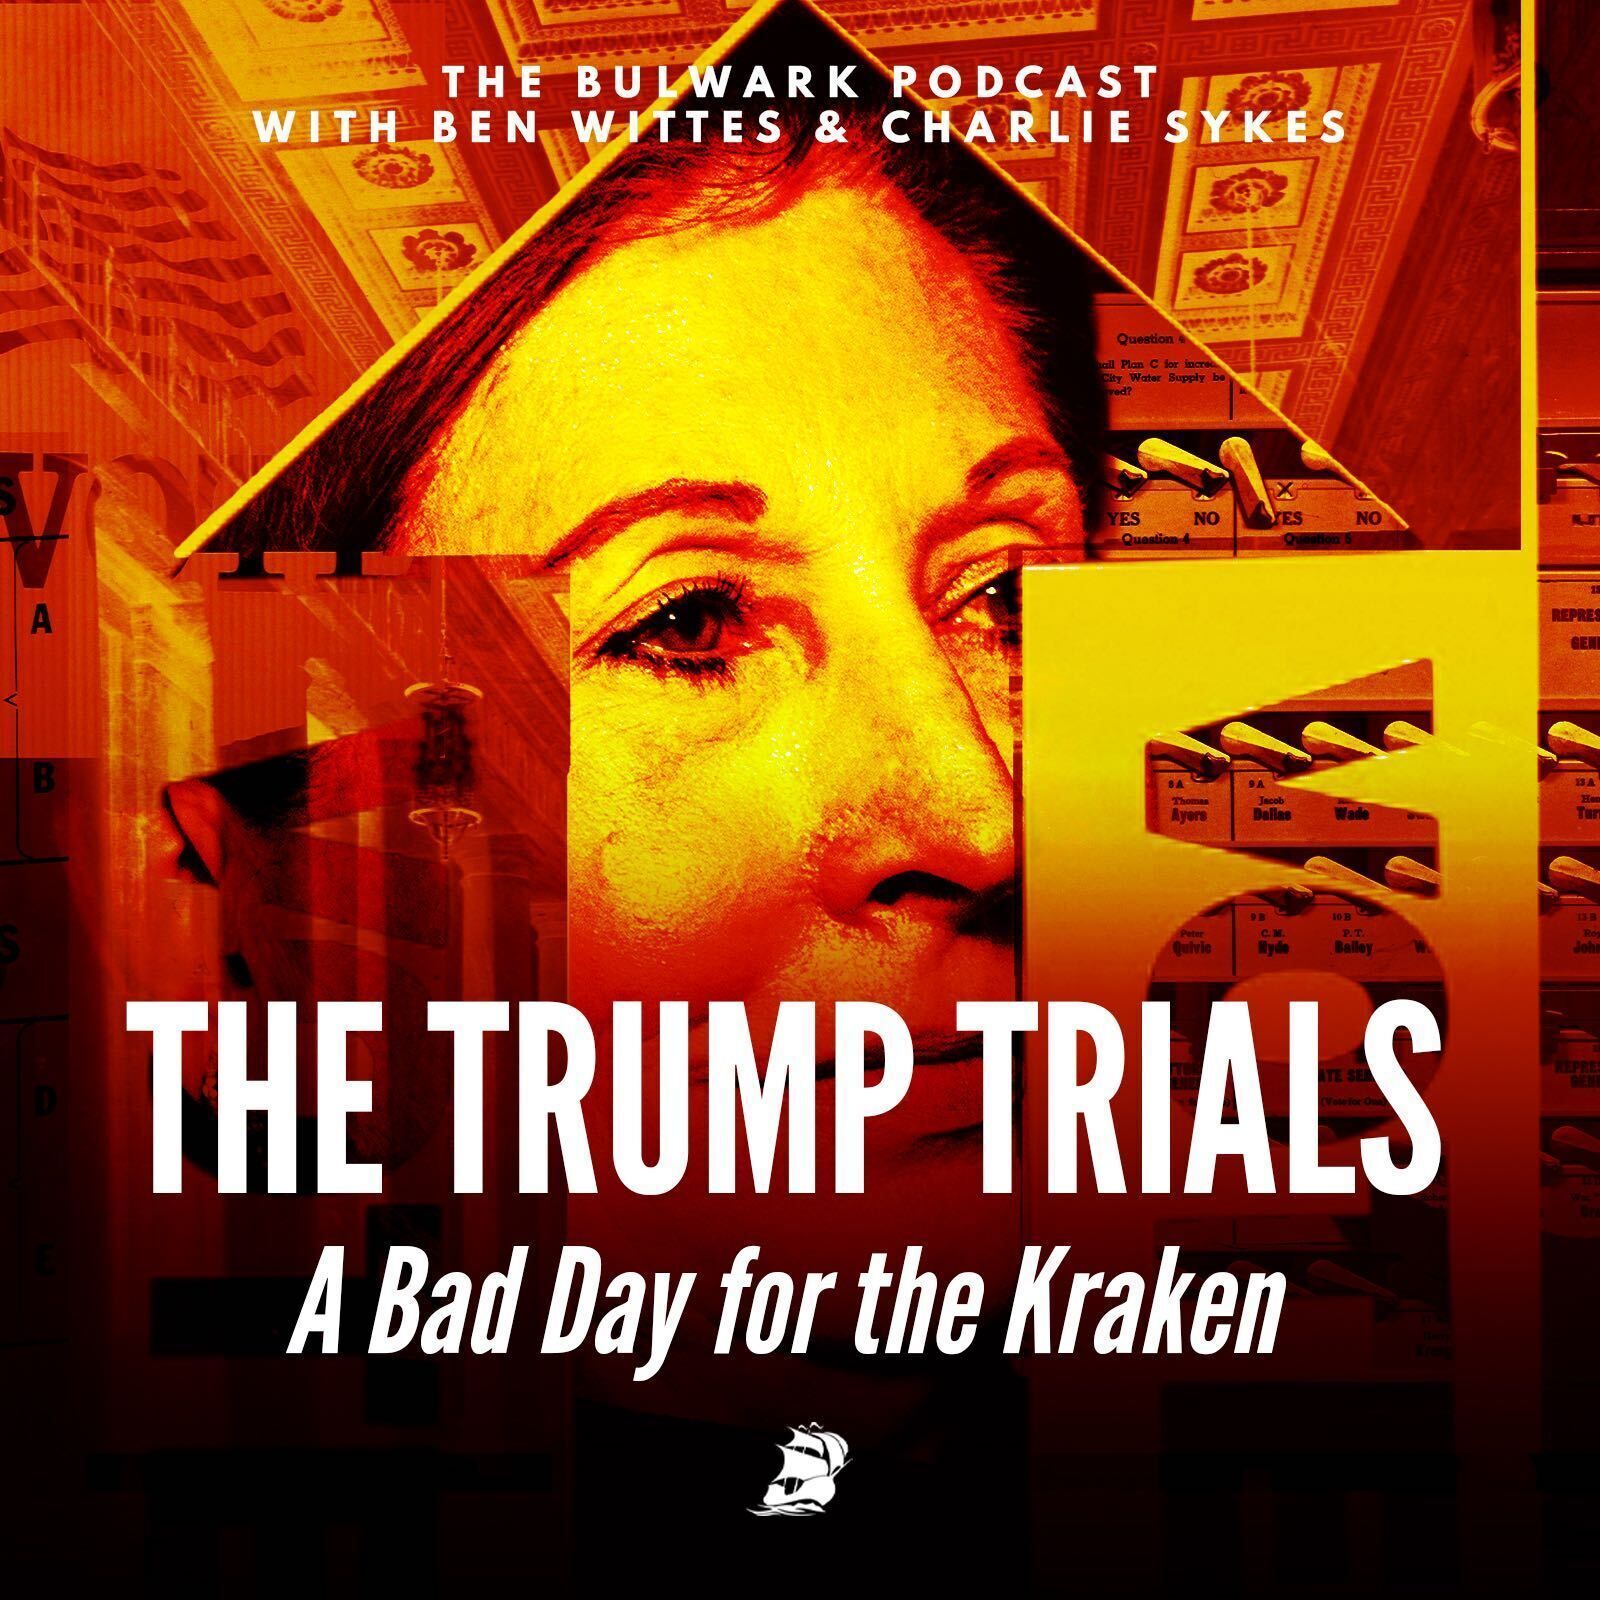 A Bad Day for the Kraken by The Bulwark Podcast